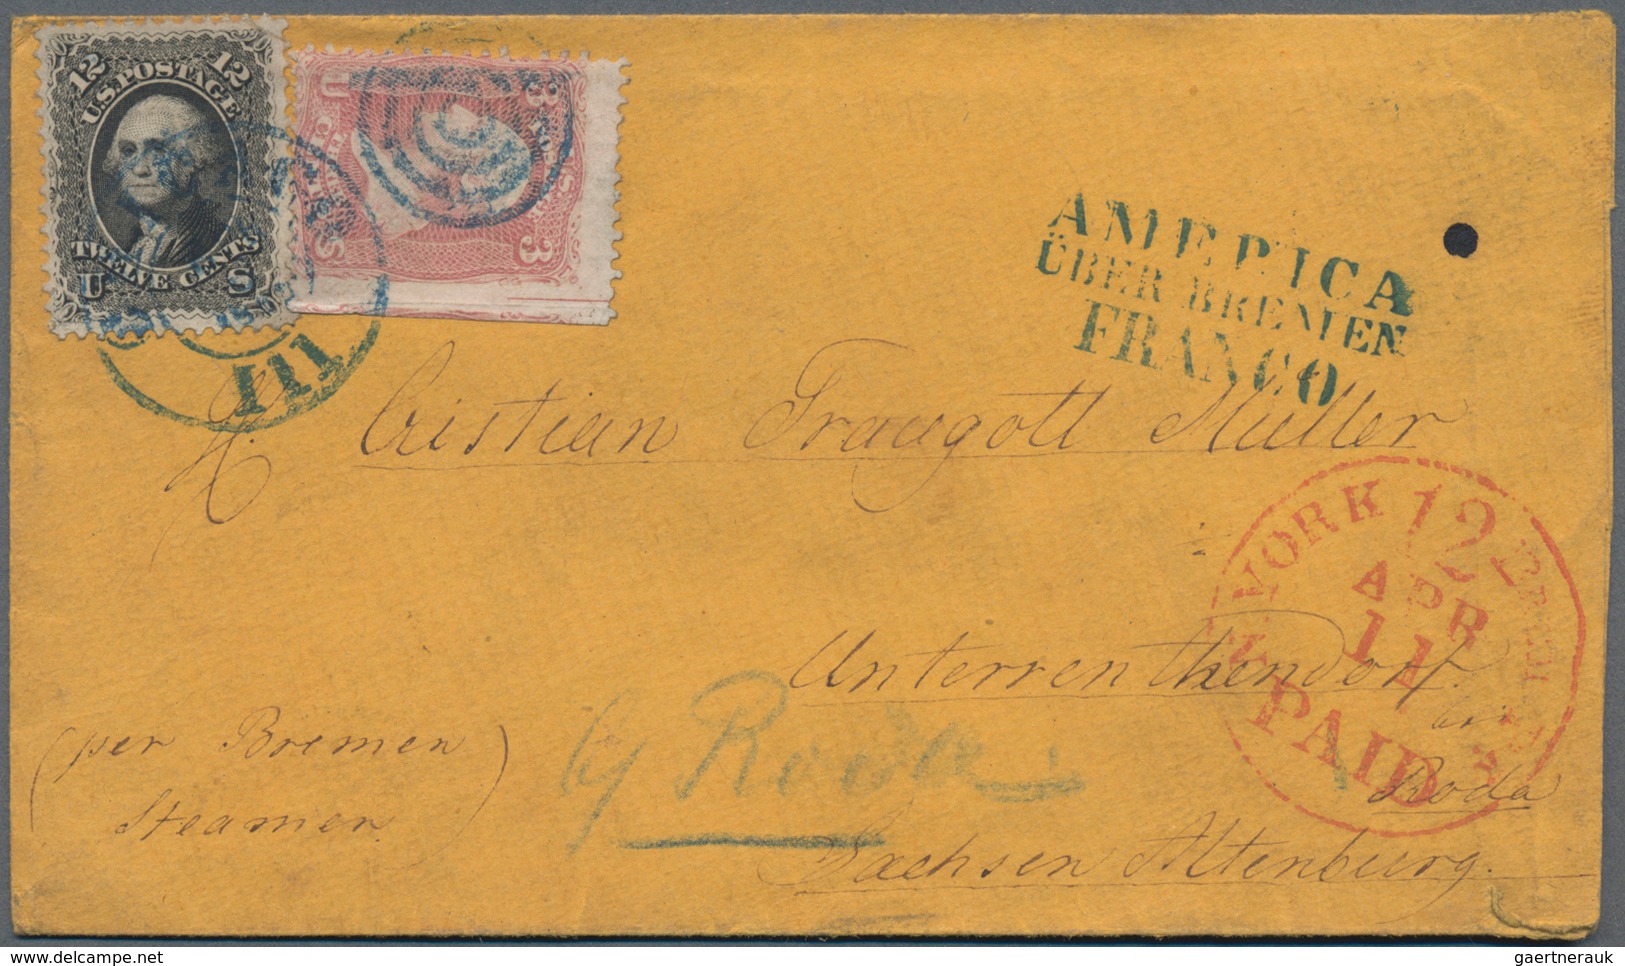 Vereinigte Staaten Von Amerika: 1863, 3c. Rose And 12c. Black (slight Imperfections) On Cover From " - Covers & Documents